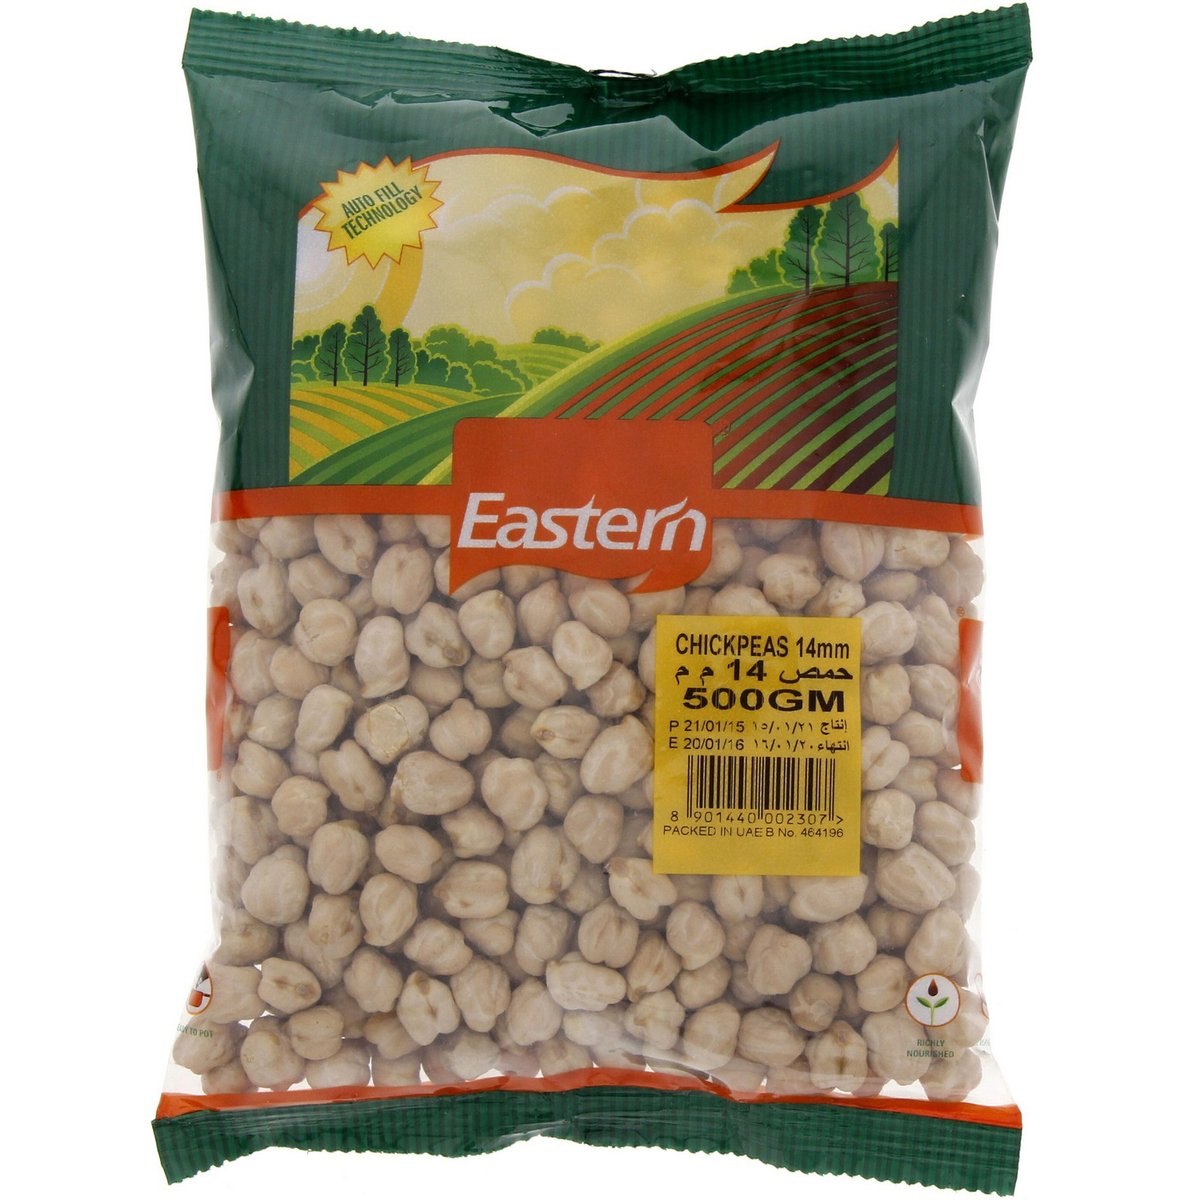 Eastern Chick Peas 14 Mm 500 g